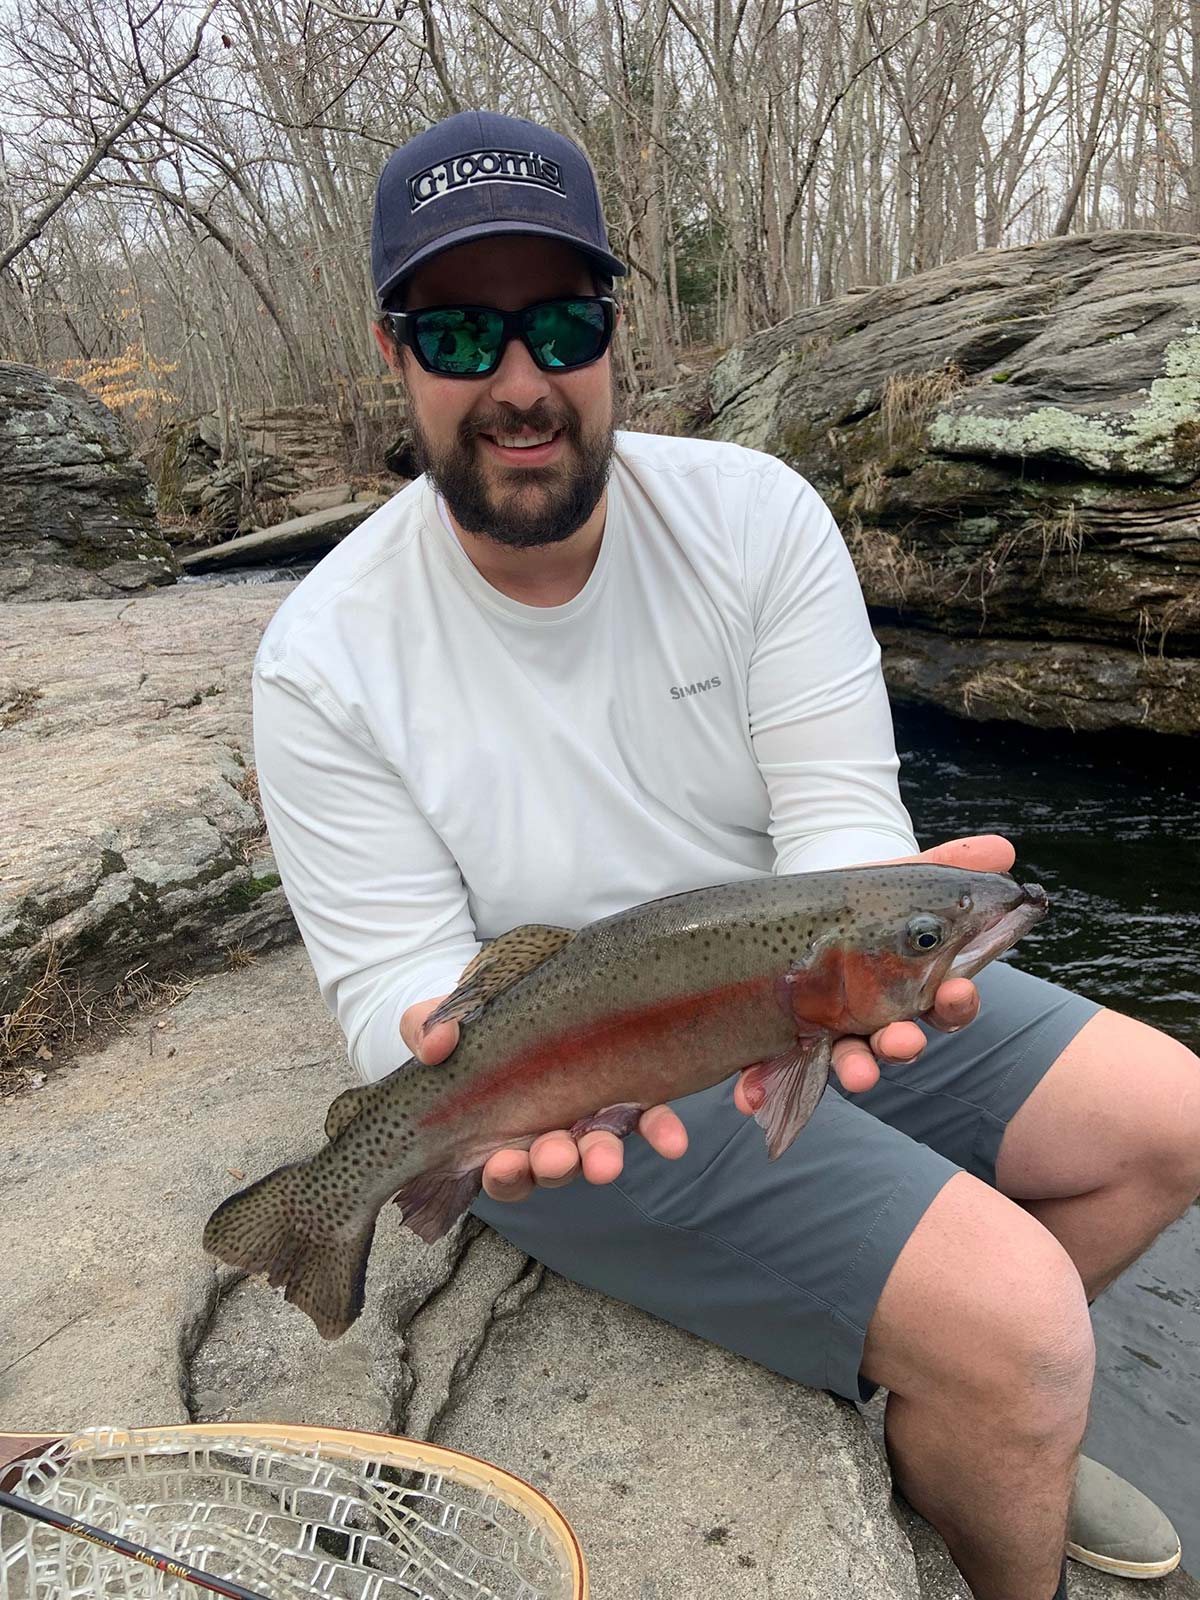 Hot Spot: To Catch A Trout - The Fisherman